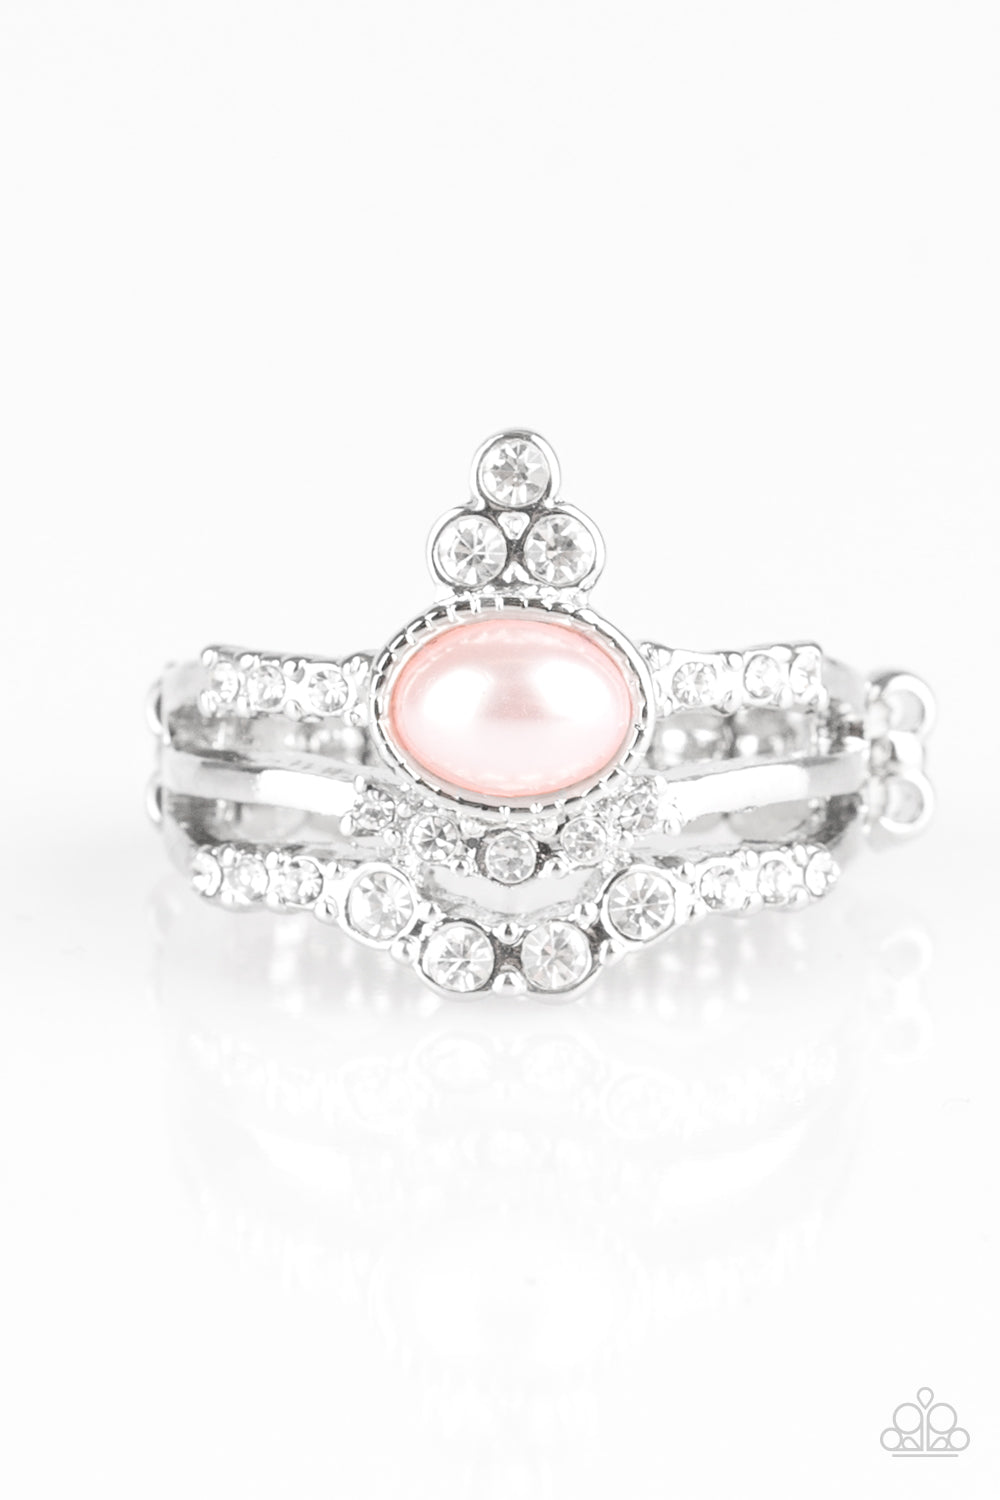 Encrusted in glassy white rhinestones, dainty silver bars arc across the finger, coalescing into an airy band. Dotted with a pearly pink bead, a glittery white rhinestone frame crowns the uppermost band for a regal finish. Features a stretchy band for a flexible fit.